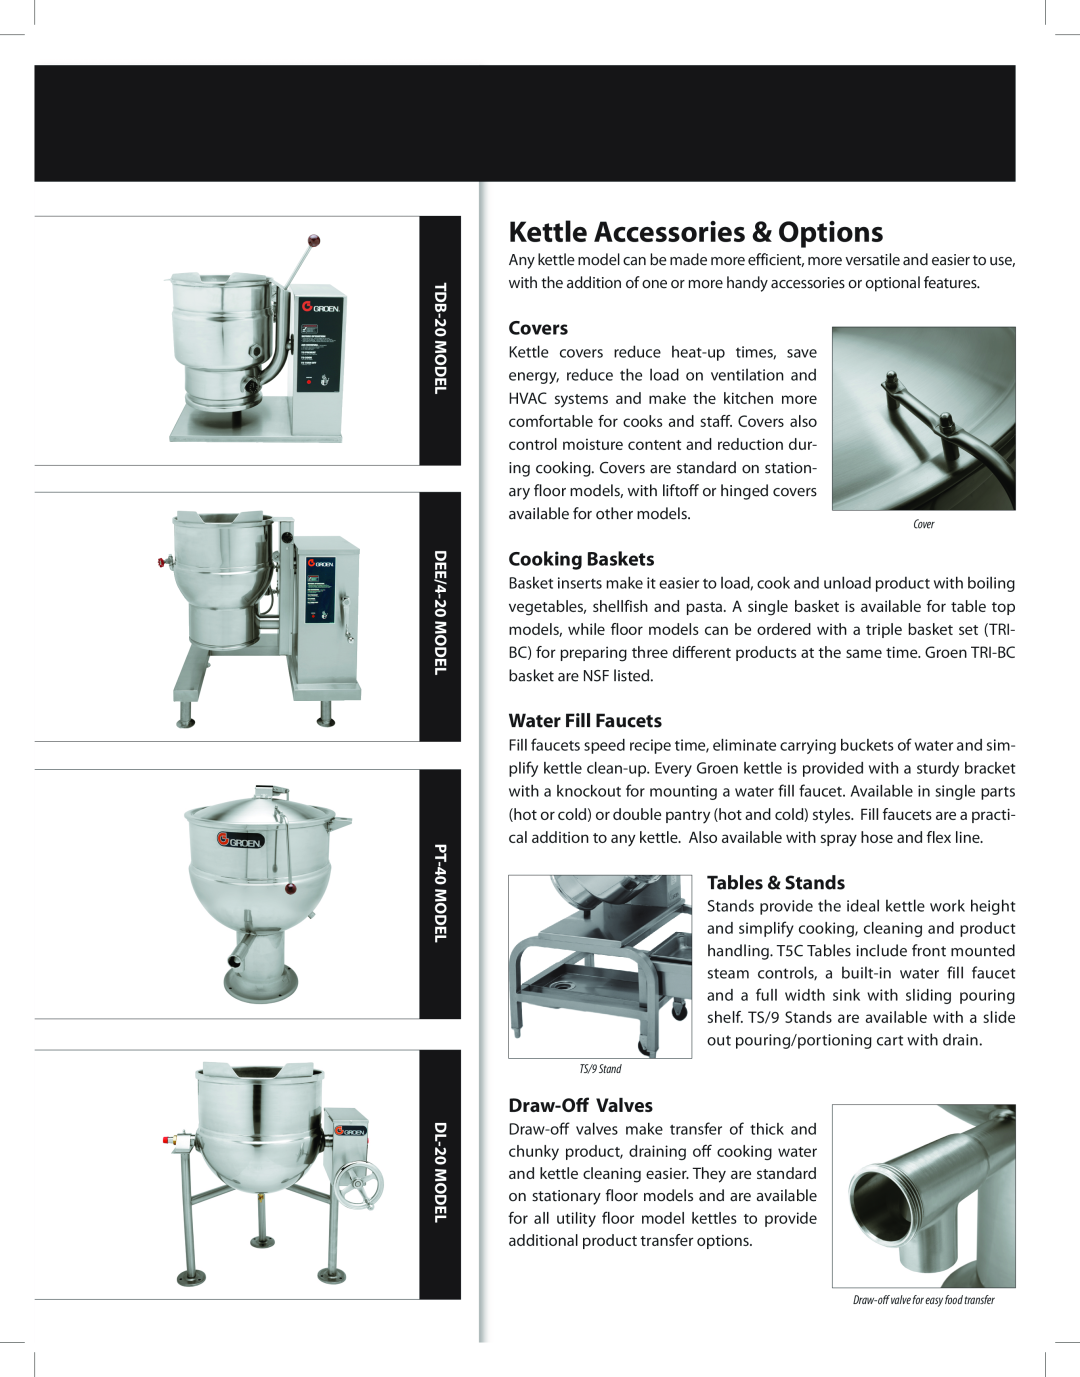 Unified Brands Steam Jacketed Kettles manual Kettle Accessories & Options, Covers, Cooking Baskets, Water Fill Faucets 